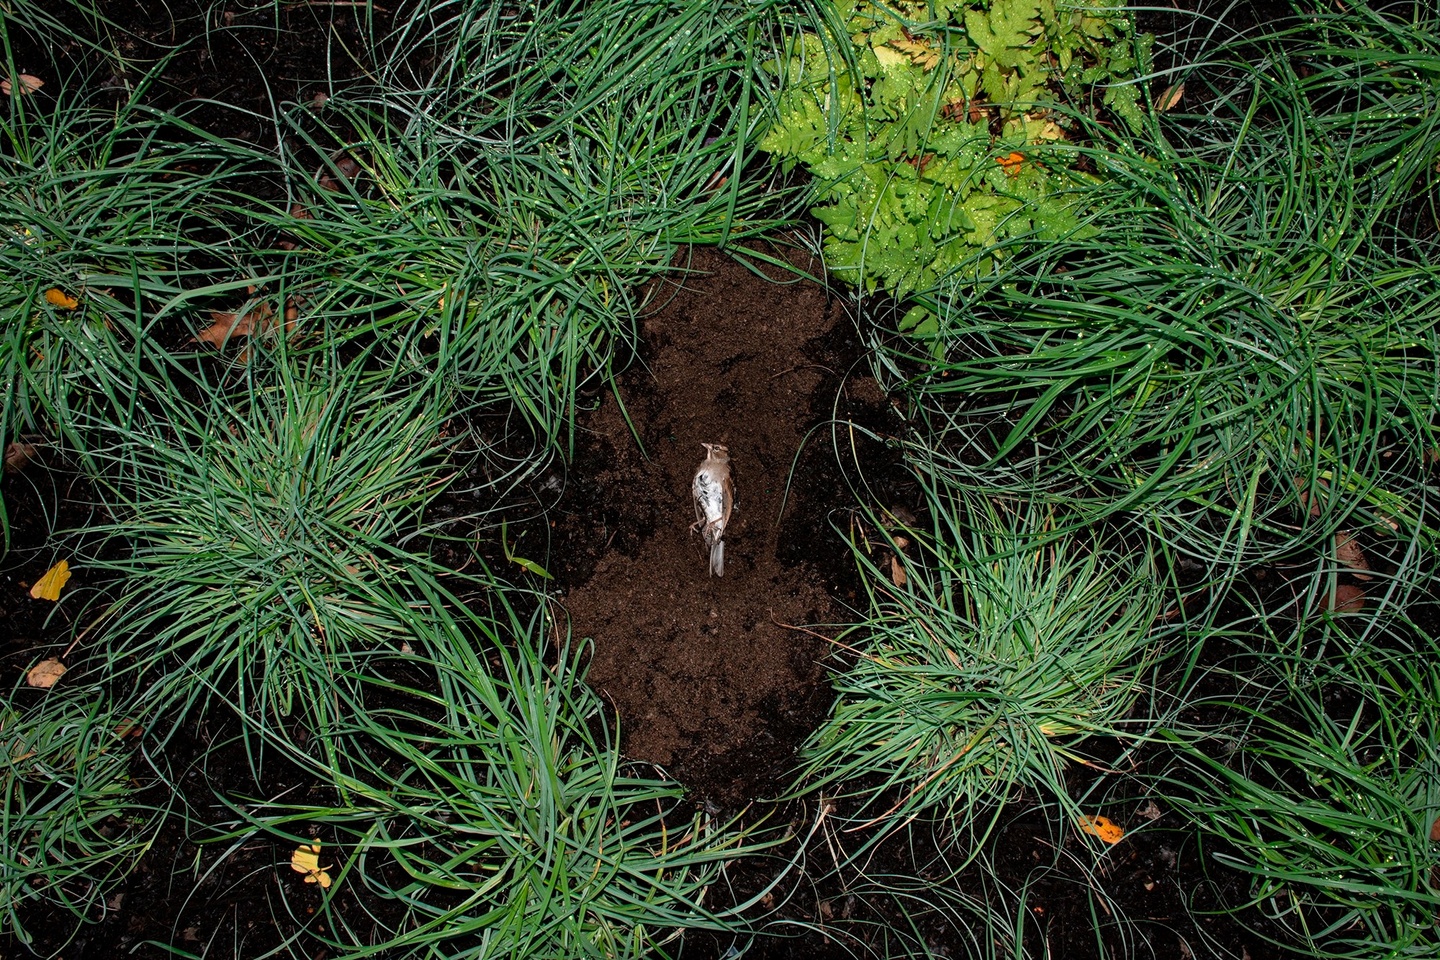 A dead bird is placed in a shallow indentation in a patch of dirt surrounded by green foliage